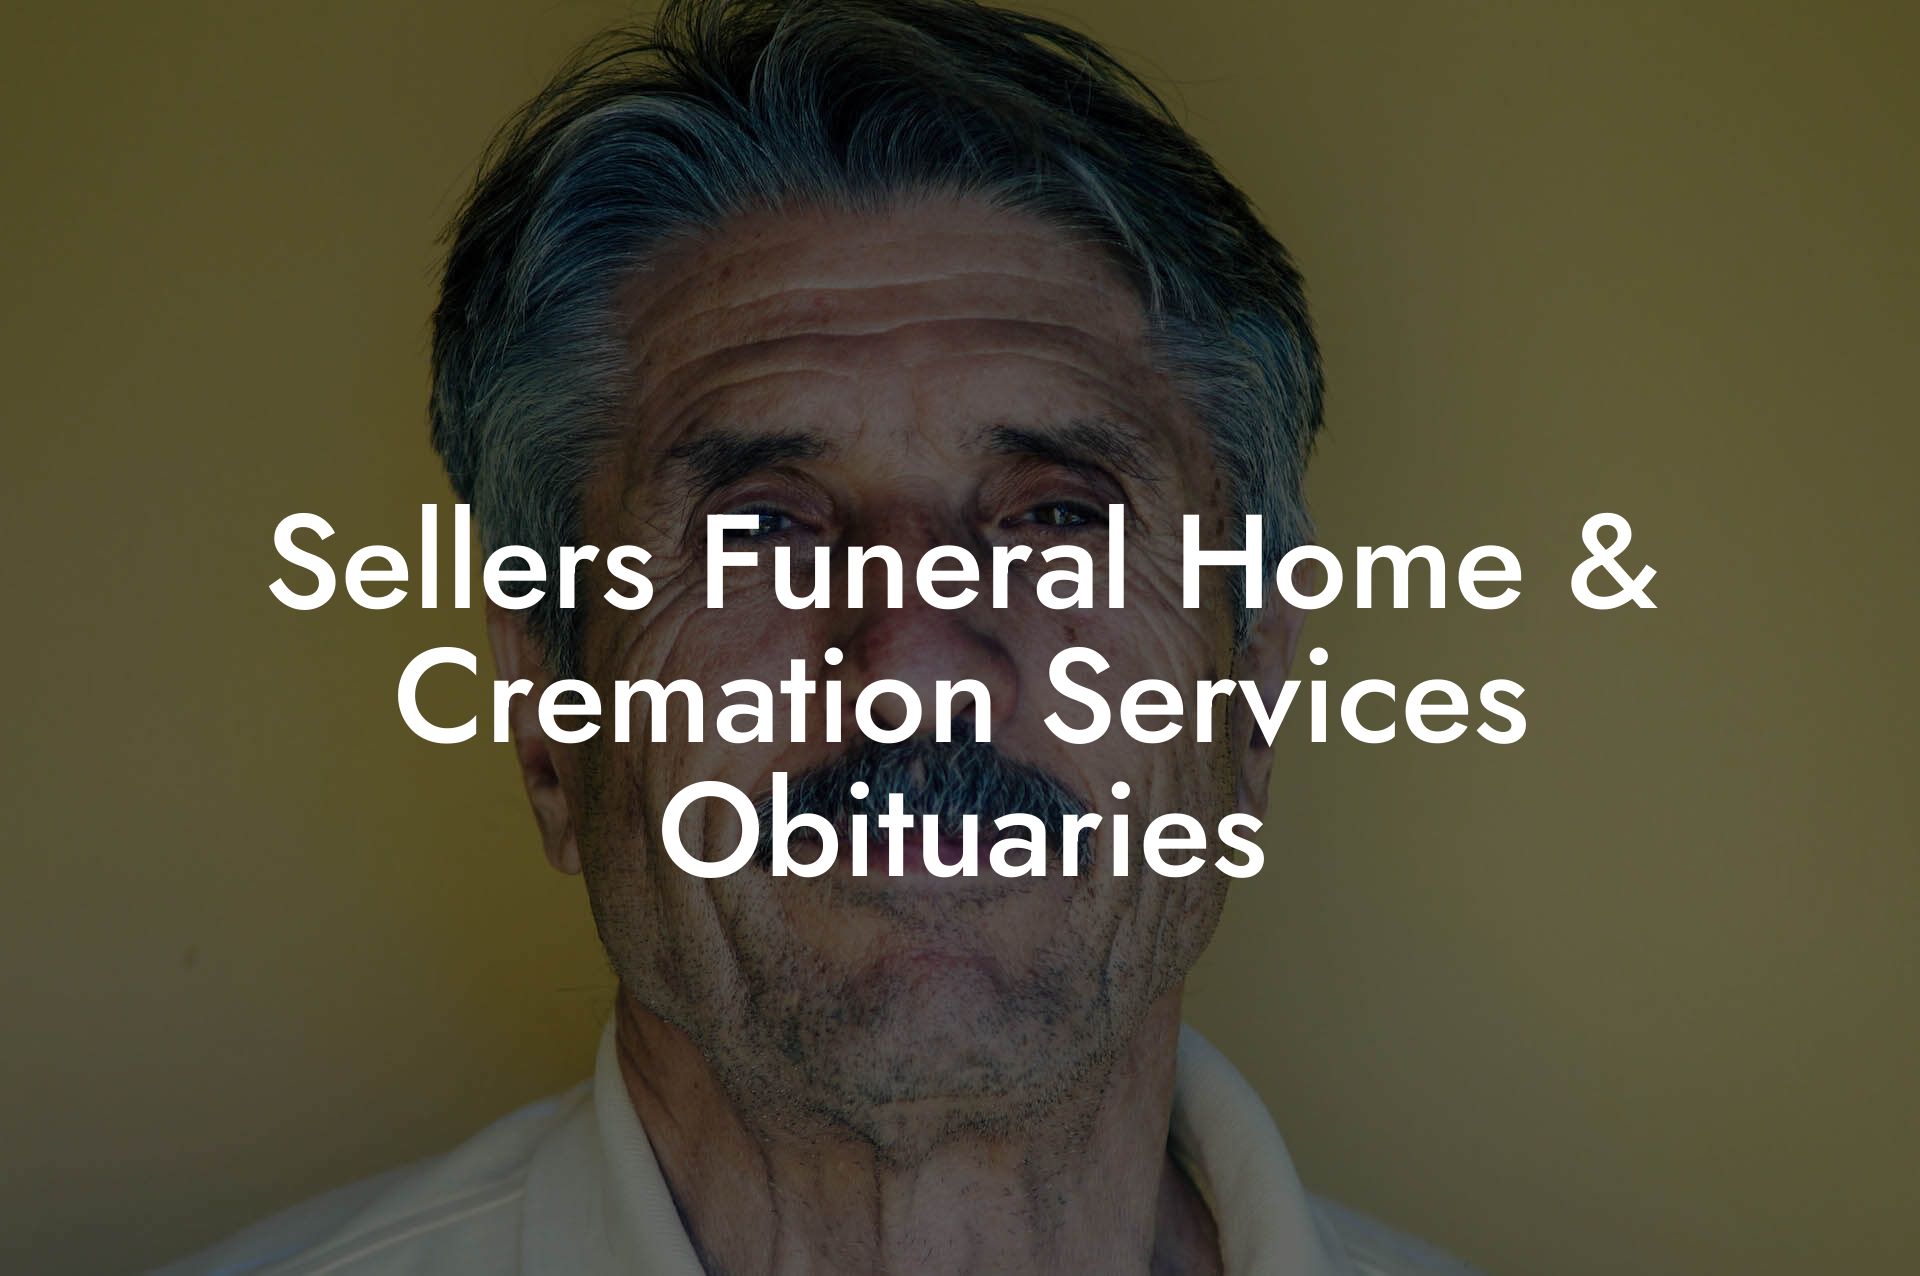 Sellers Funeral Home & Cremation Services Obituaries